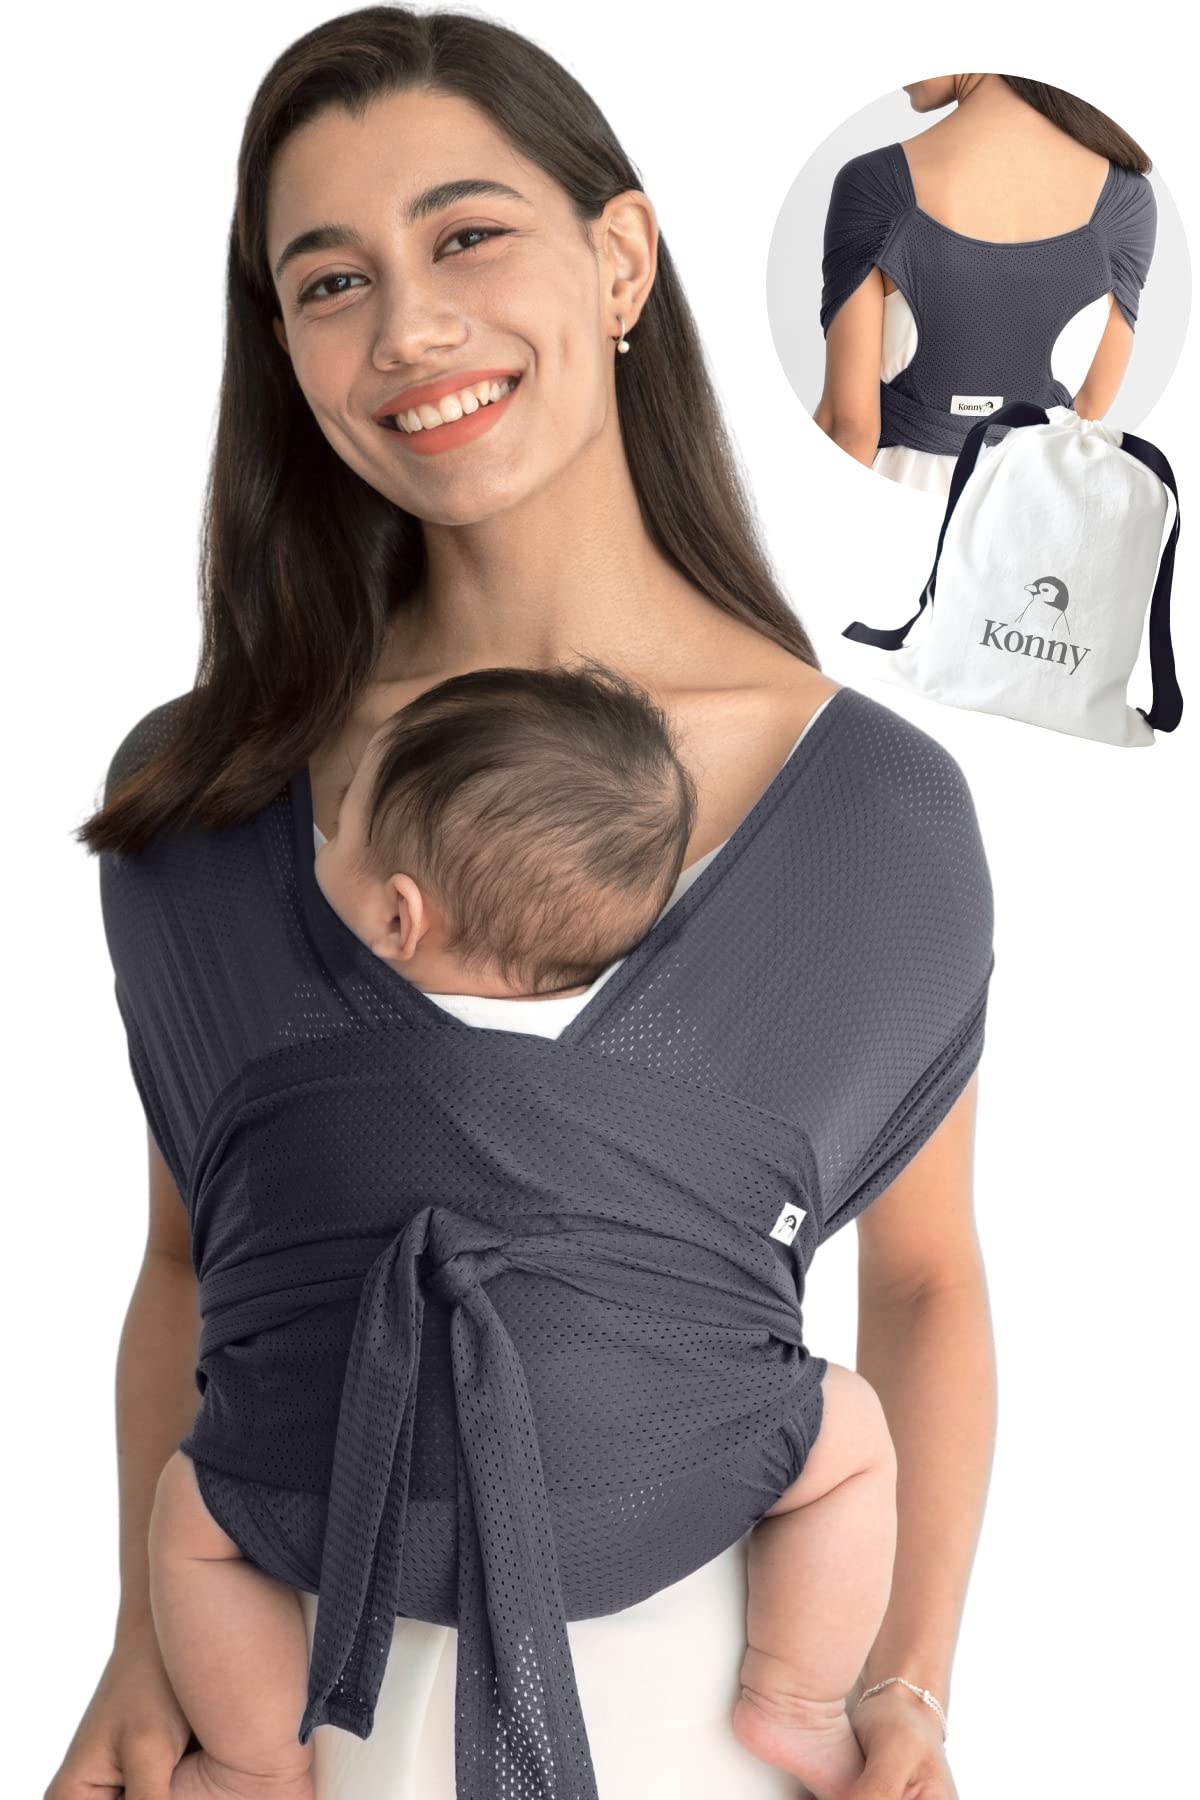 Konny Baby Carrier AirMesh for Summer Carrier Wrap, Easy to Wear Baby Wrap Carrier, Perfect Essentials Cloths for Newborn Babies up to 44 lbs, (Charcoal, M)